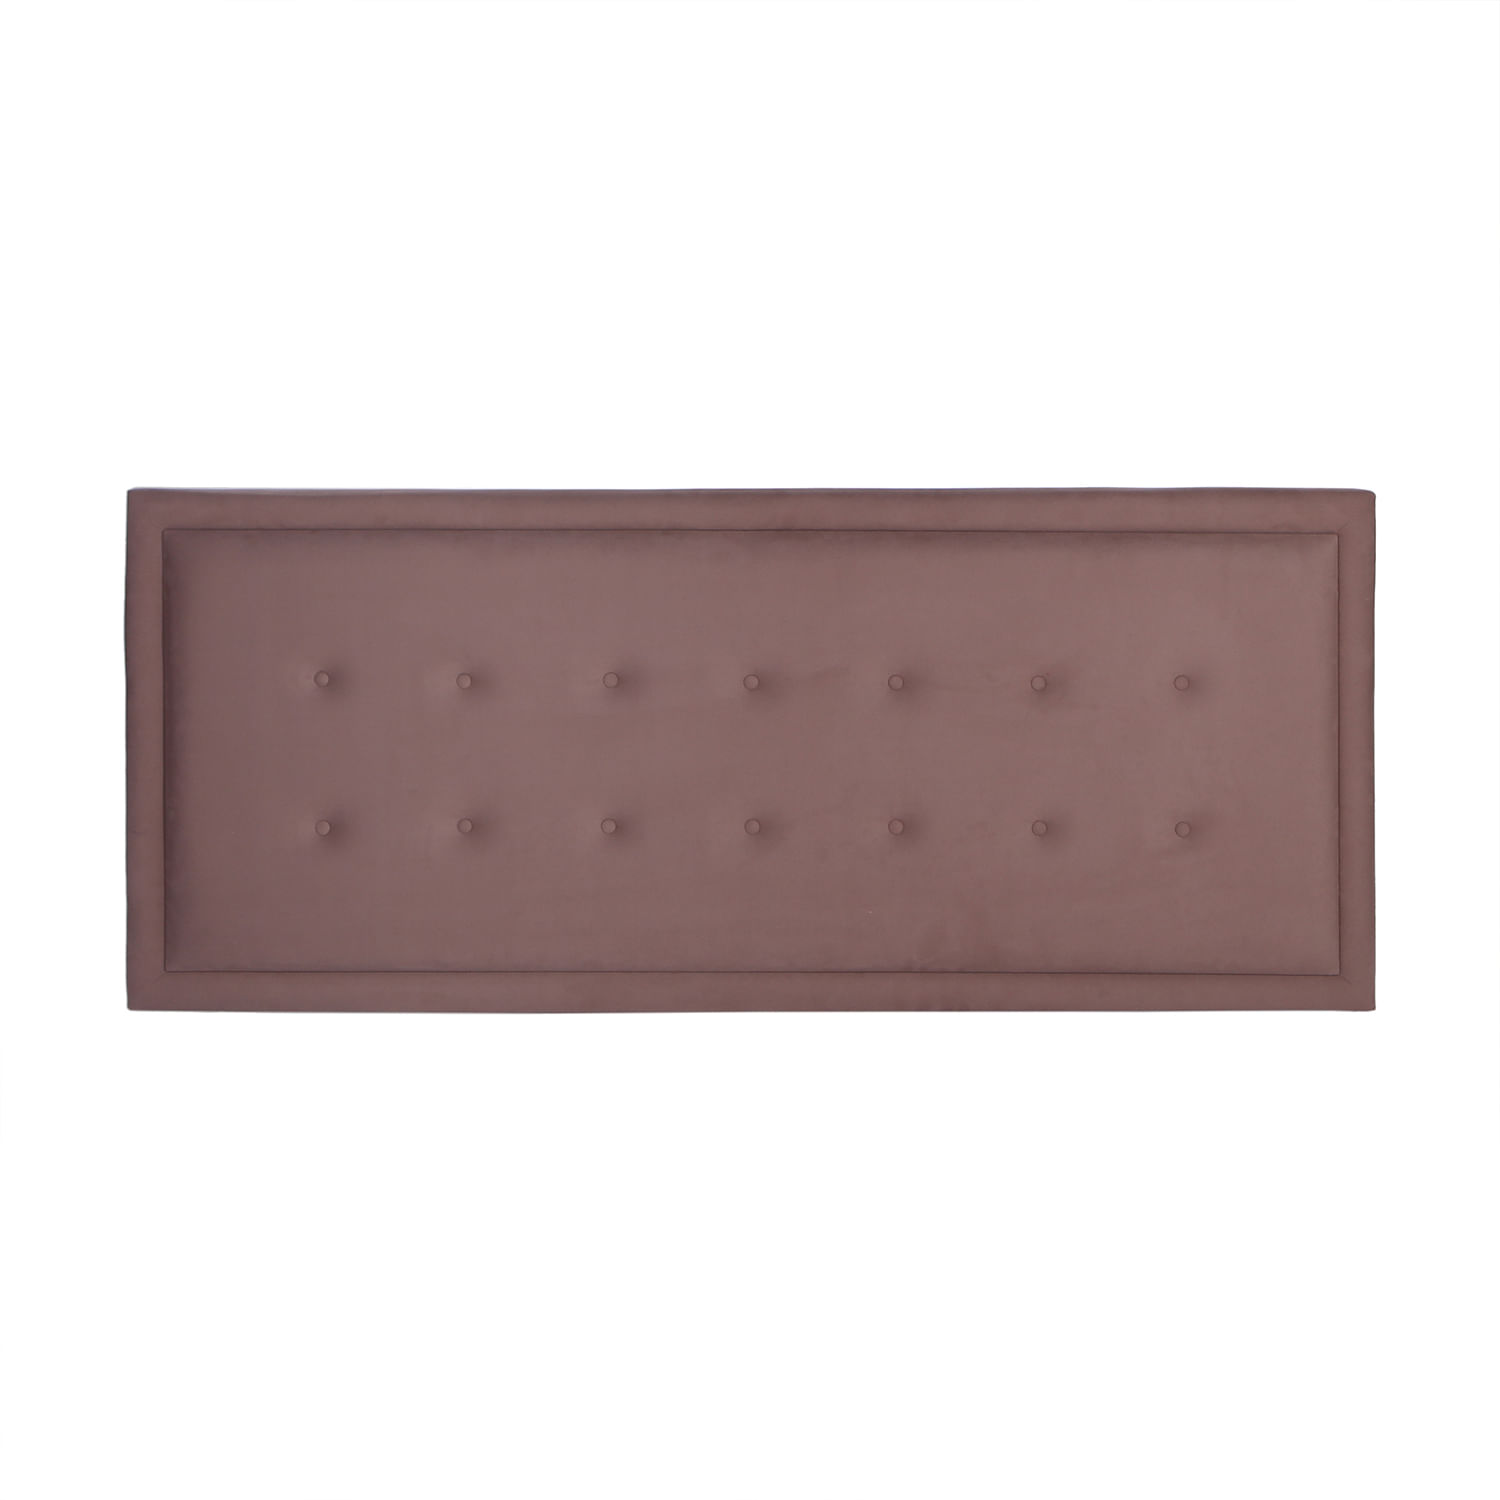 Painel-Lagoa-Suede-Chocolate-King